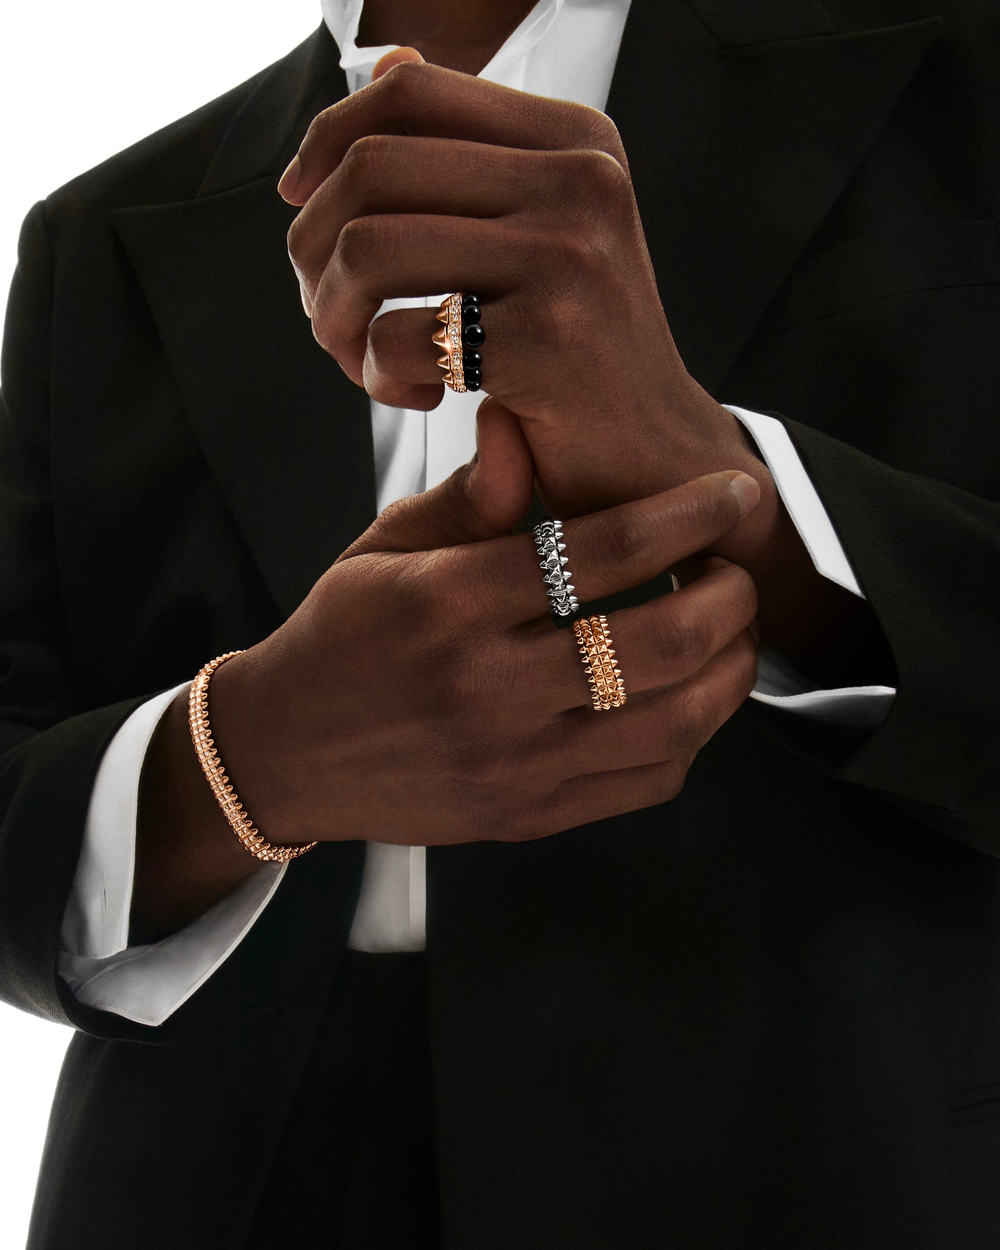 Black man wearing multiple luxury Cartier rings in silver and gold, and a gold bracelet